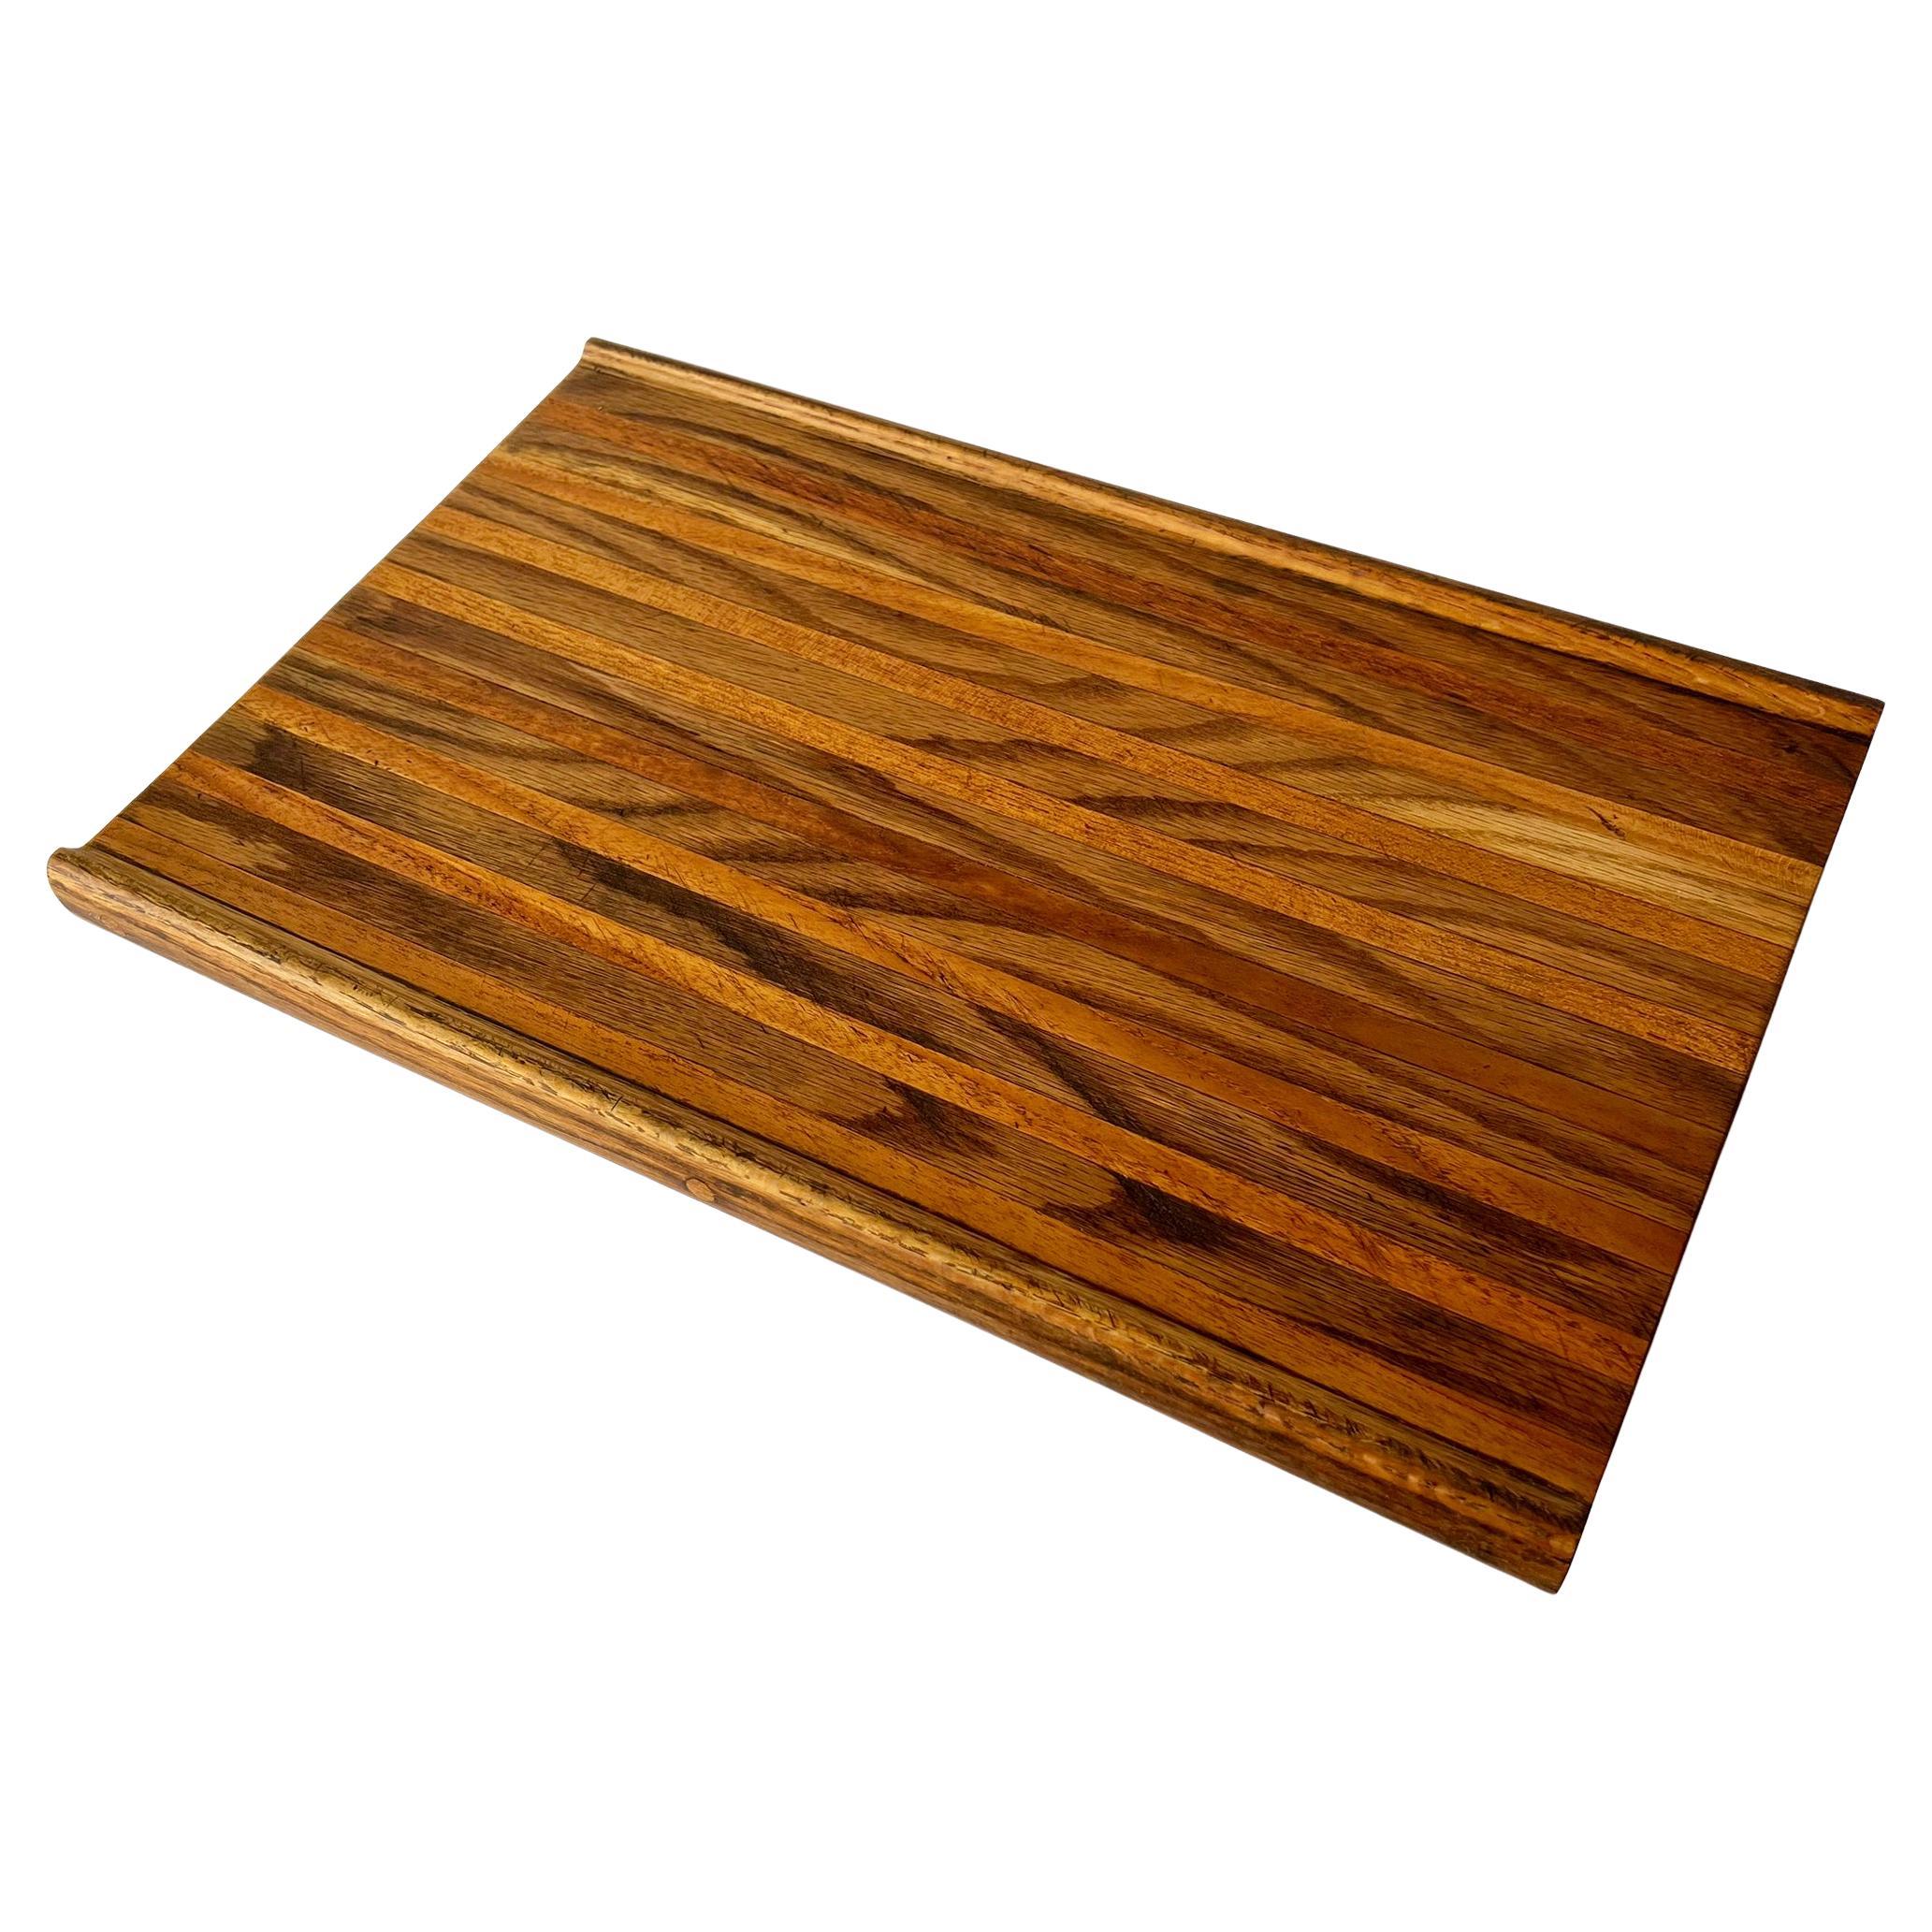 Robert Trout California Studio Made Allied Crafts Laminated Wood Cutting Board For Sale